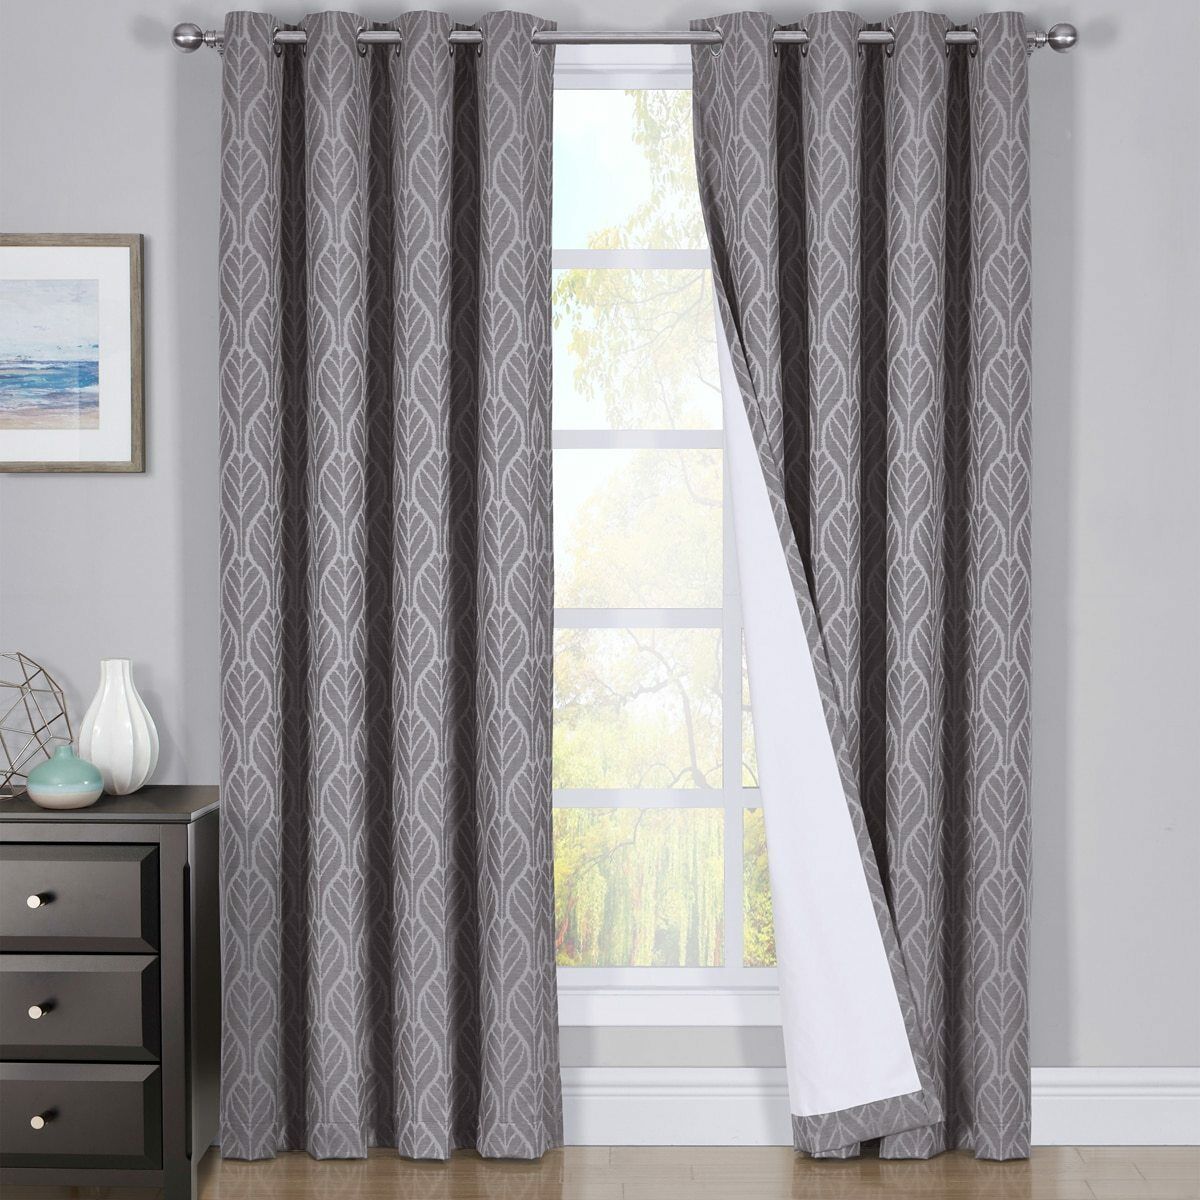 Hilton Window Treatment Thermal Insulated Grommet Blackout Curtains /drapes  Pair Regarding Hudson Pintuck Window Curtain Valances (View 10 of 20)